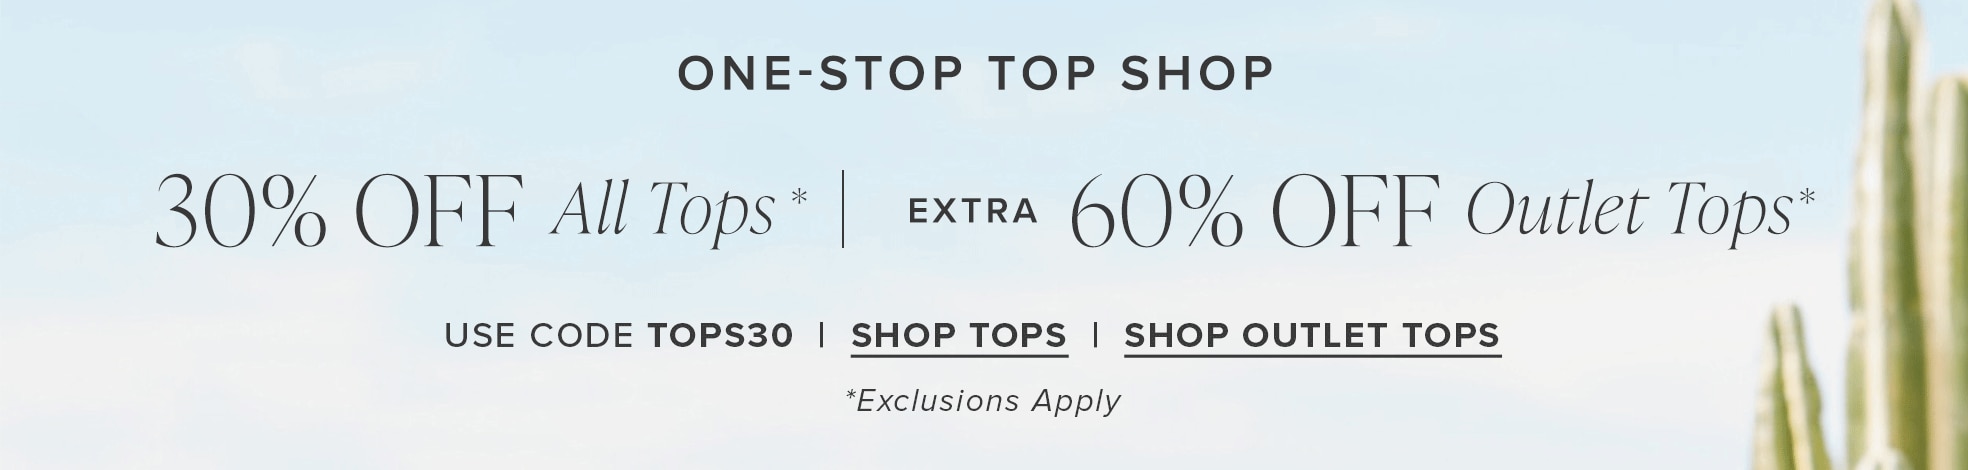 30% Off All Tops + 60% Off Outlet Tops